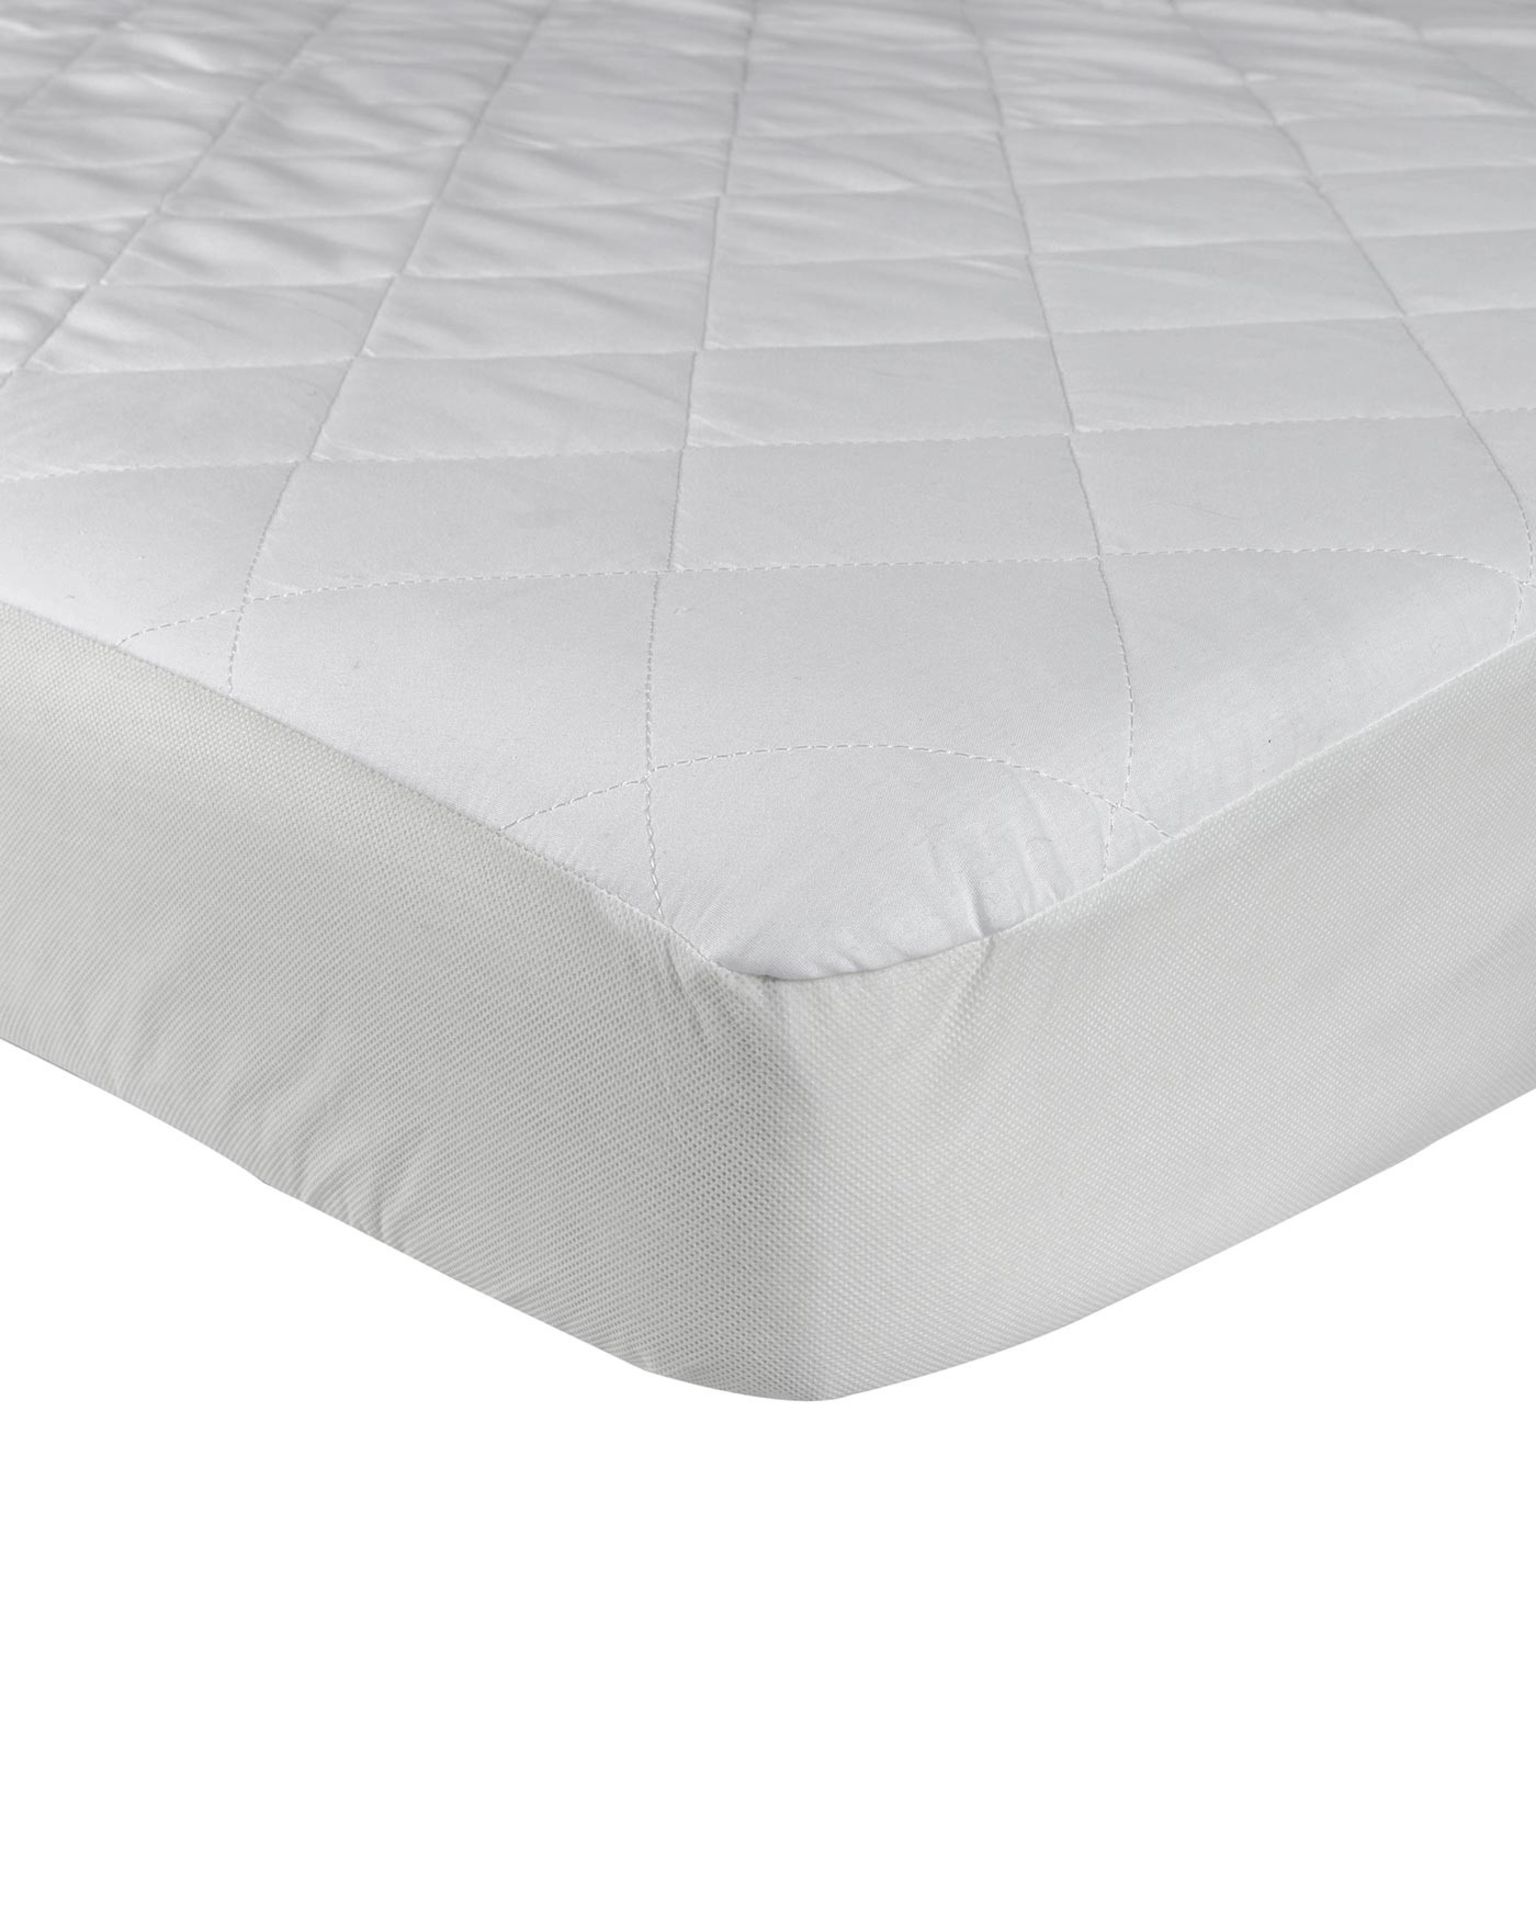 V Brand New 137x190+33cm Double Luxury Quilted Fitted Extra Deep Mattress Protector